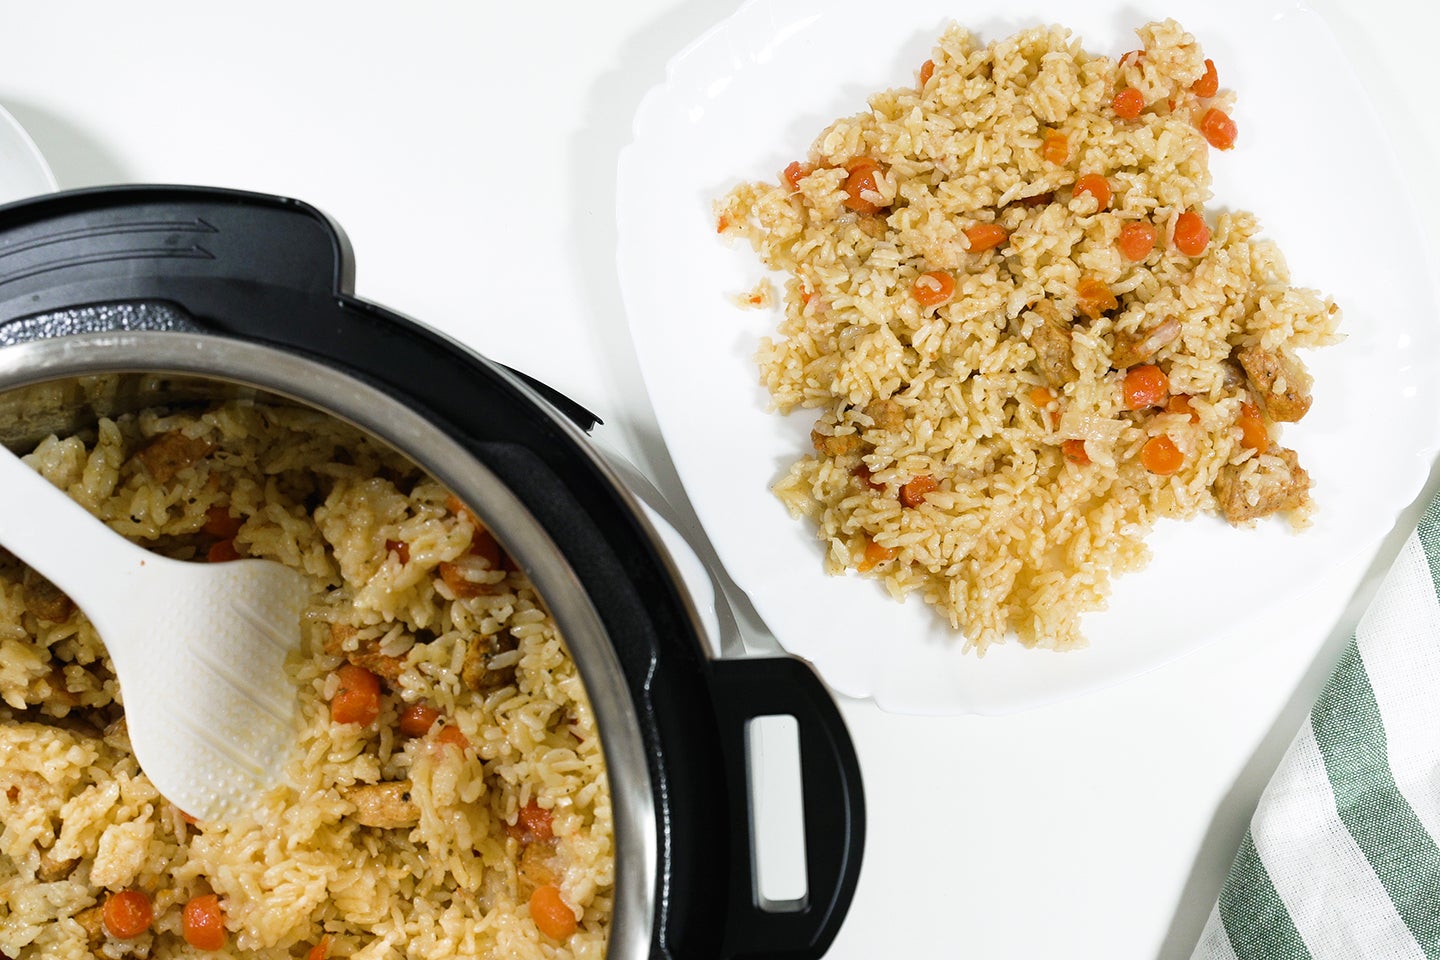 Rice with meat and vegetables prepared in multi cooker